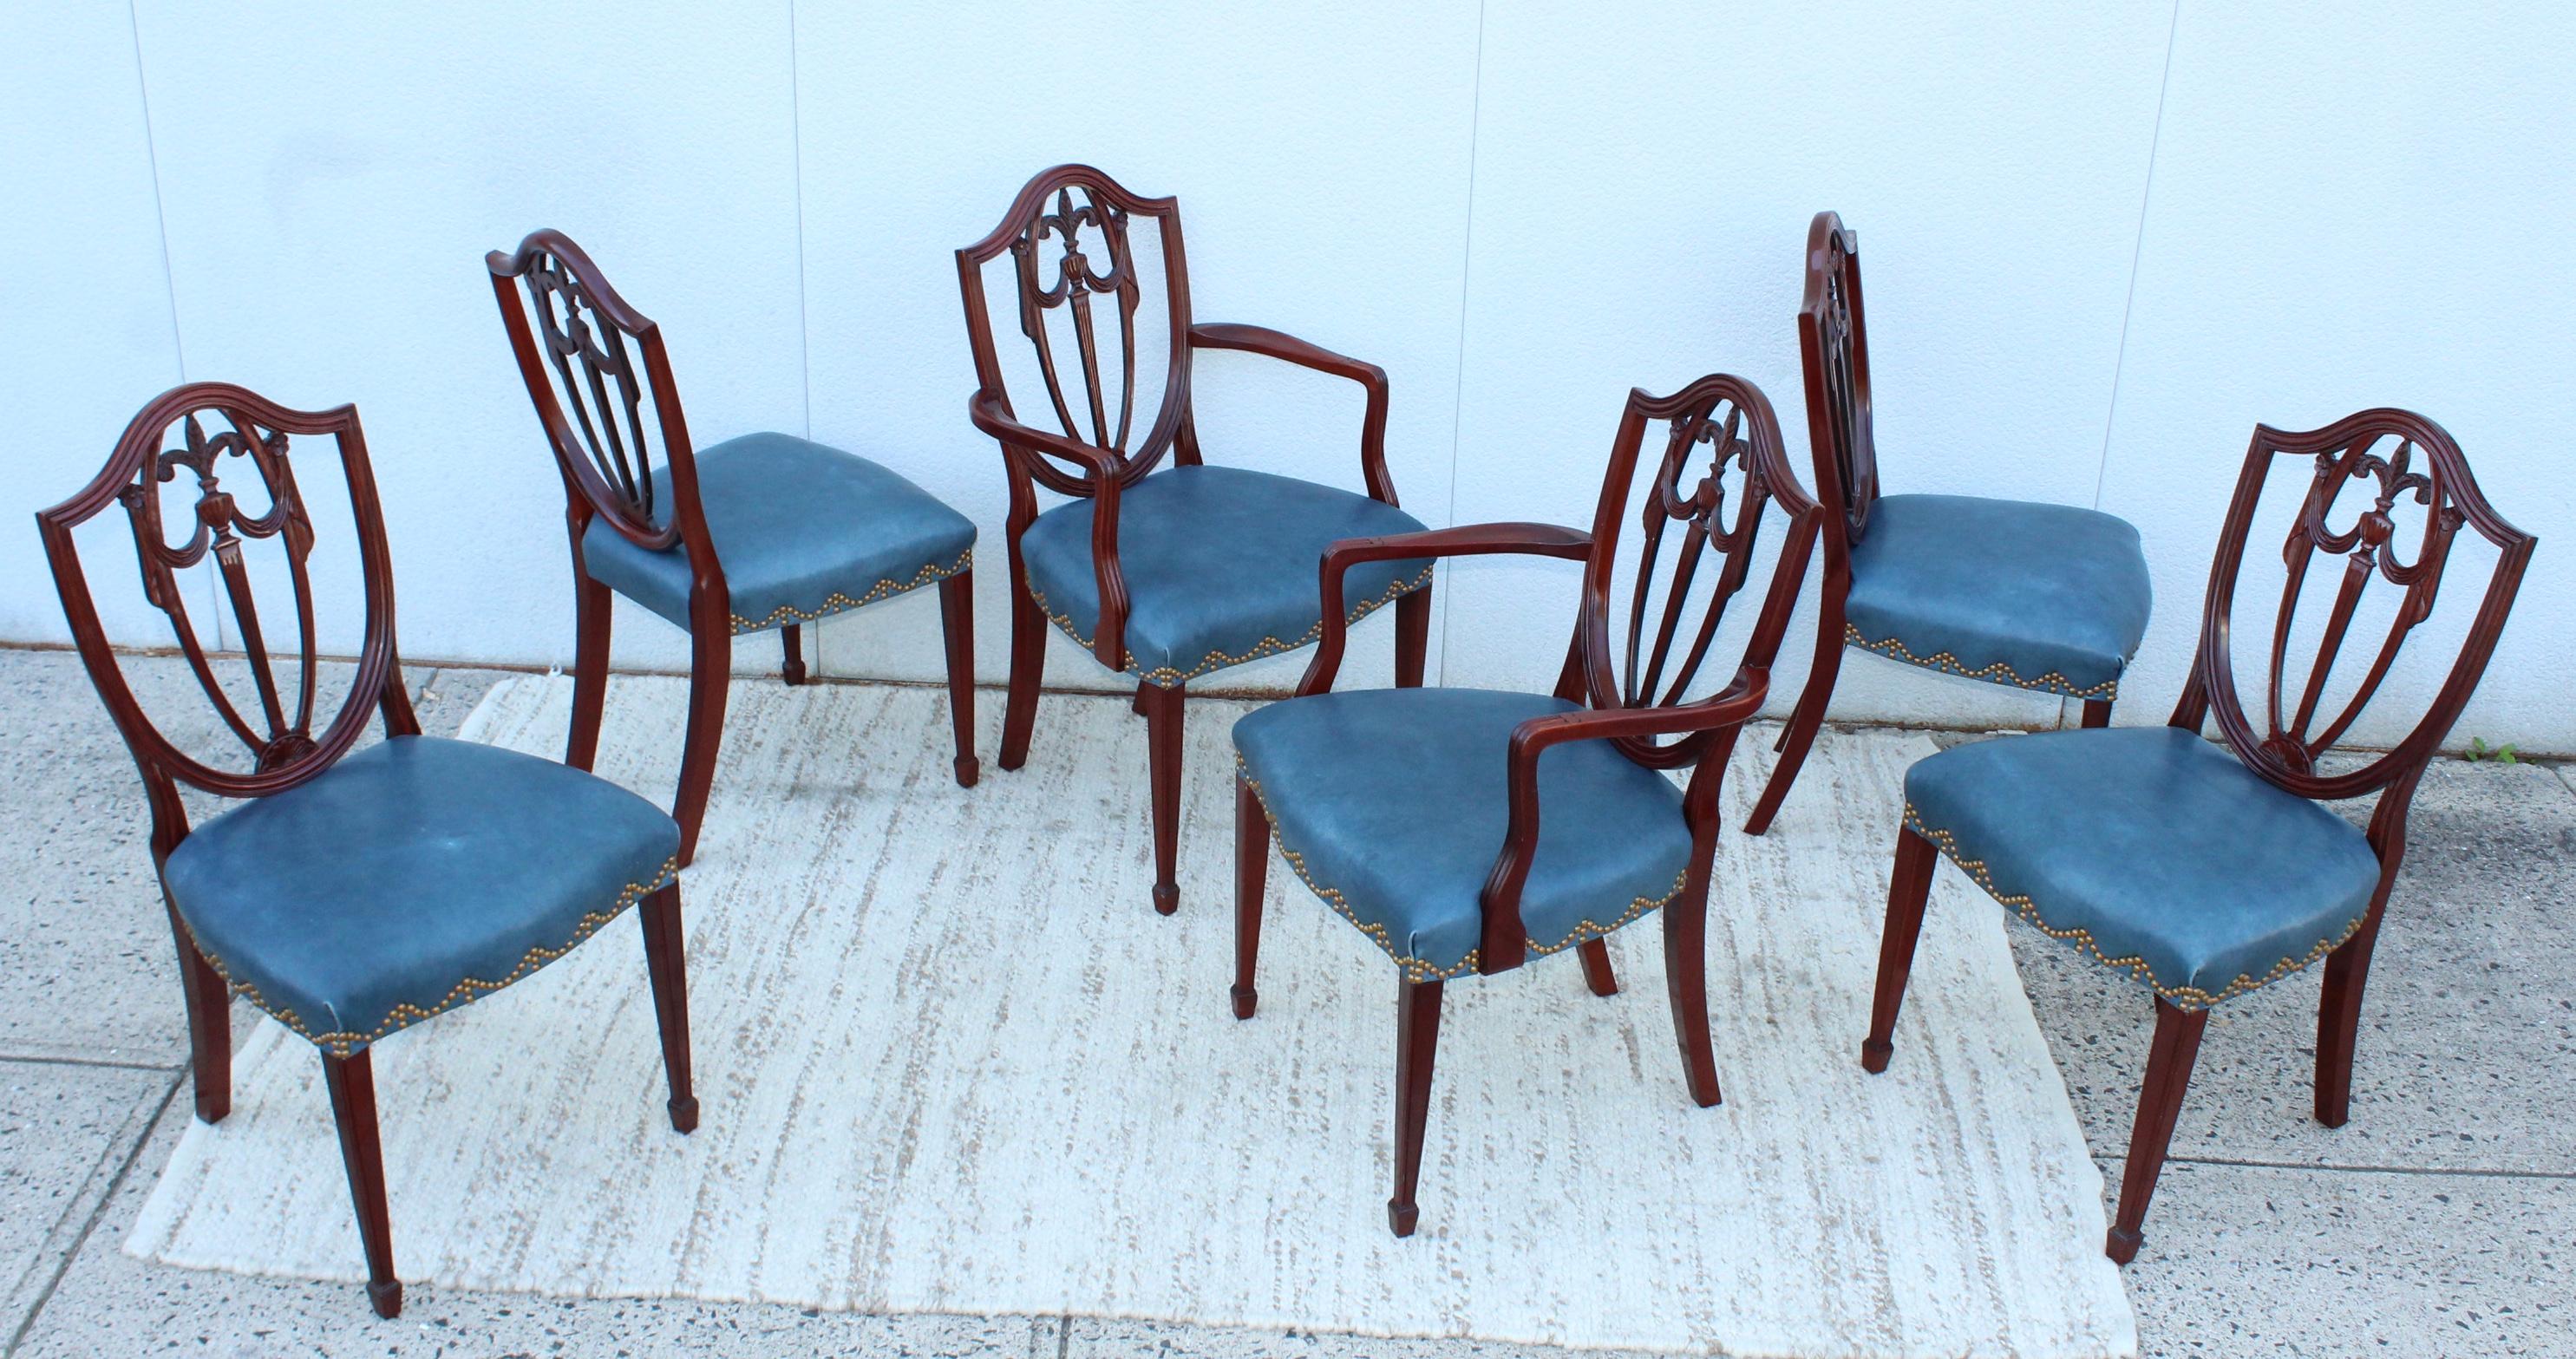 1970's mahogany and leather with brass nail detail dining chairs by Kindel furniture, in vintage original condition with some wear and patina due to age and use, there is some wear and a few stains to the leather and some wear to the wood.

Side